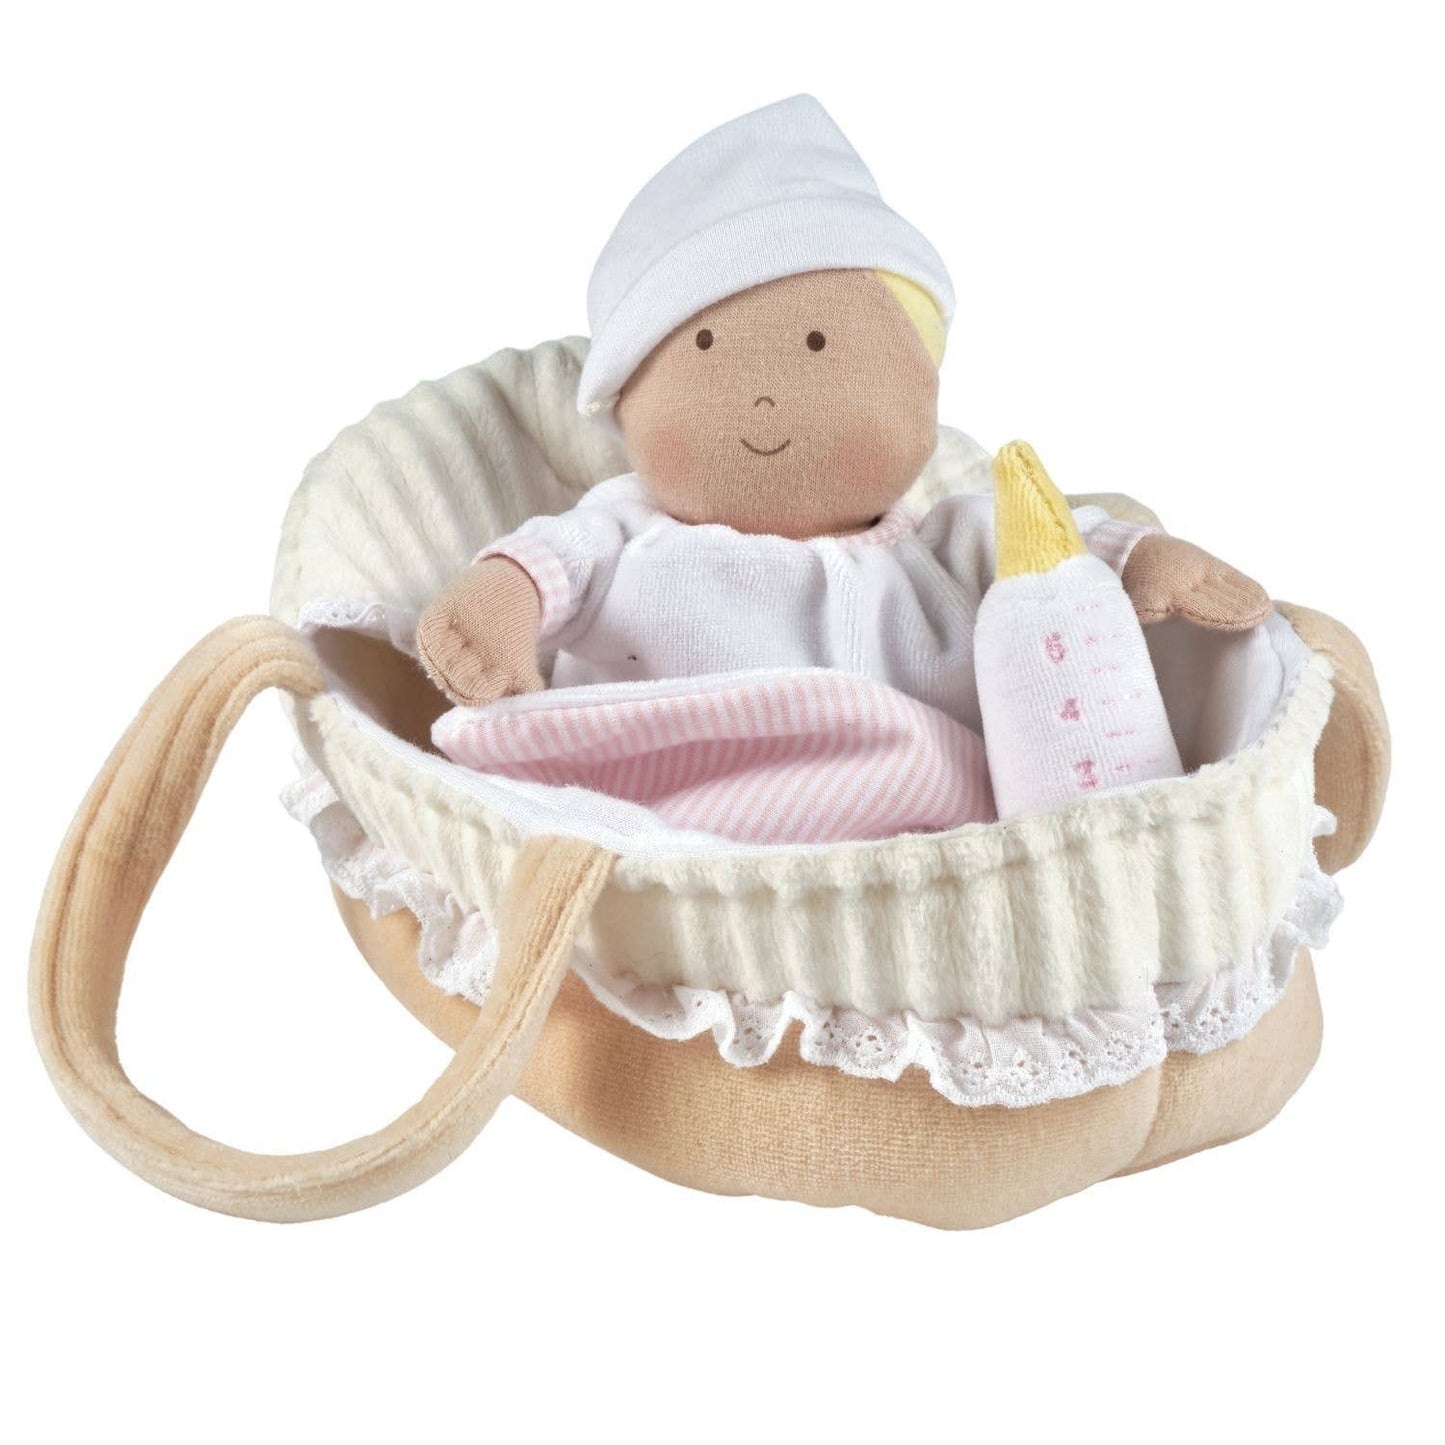 Baby Grace with Carry Cot, Bottle & Blanket